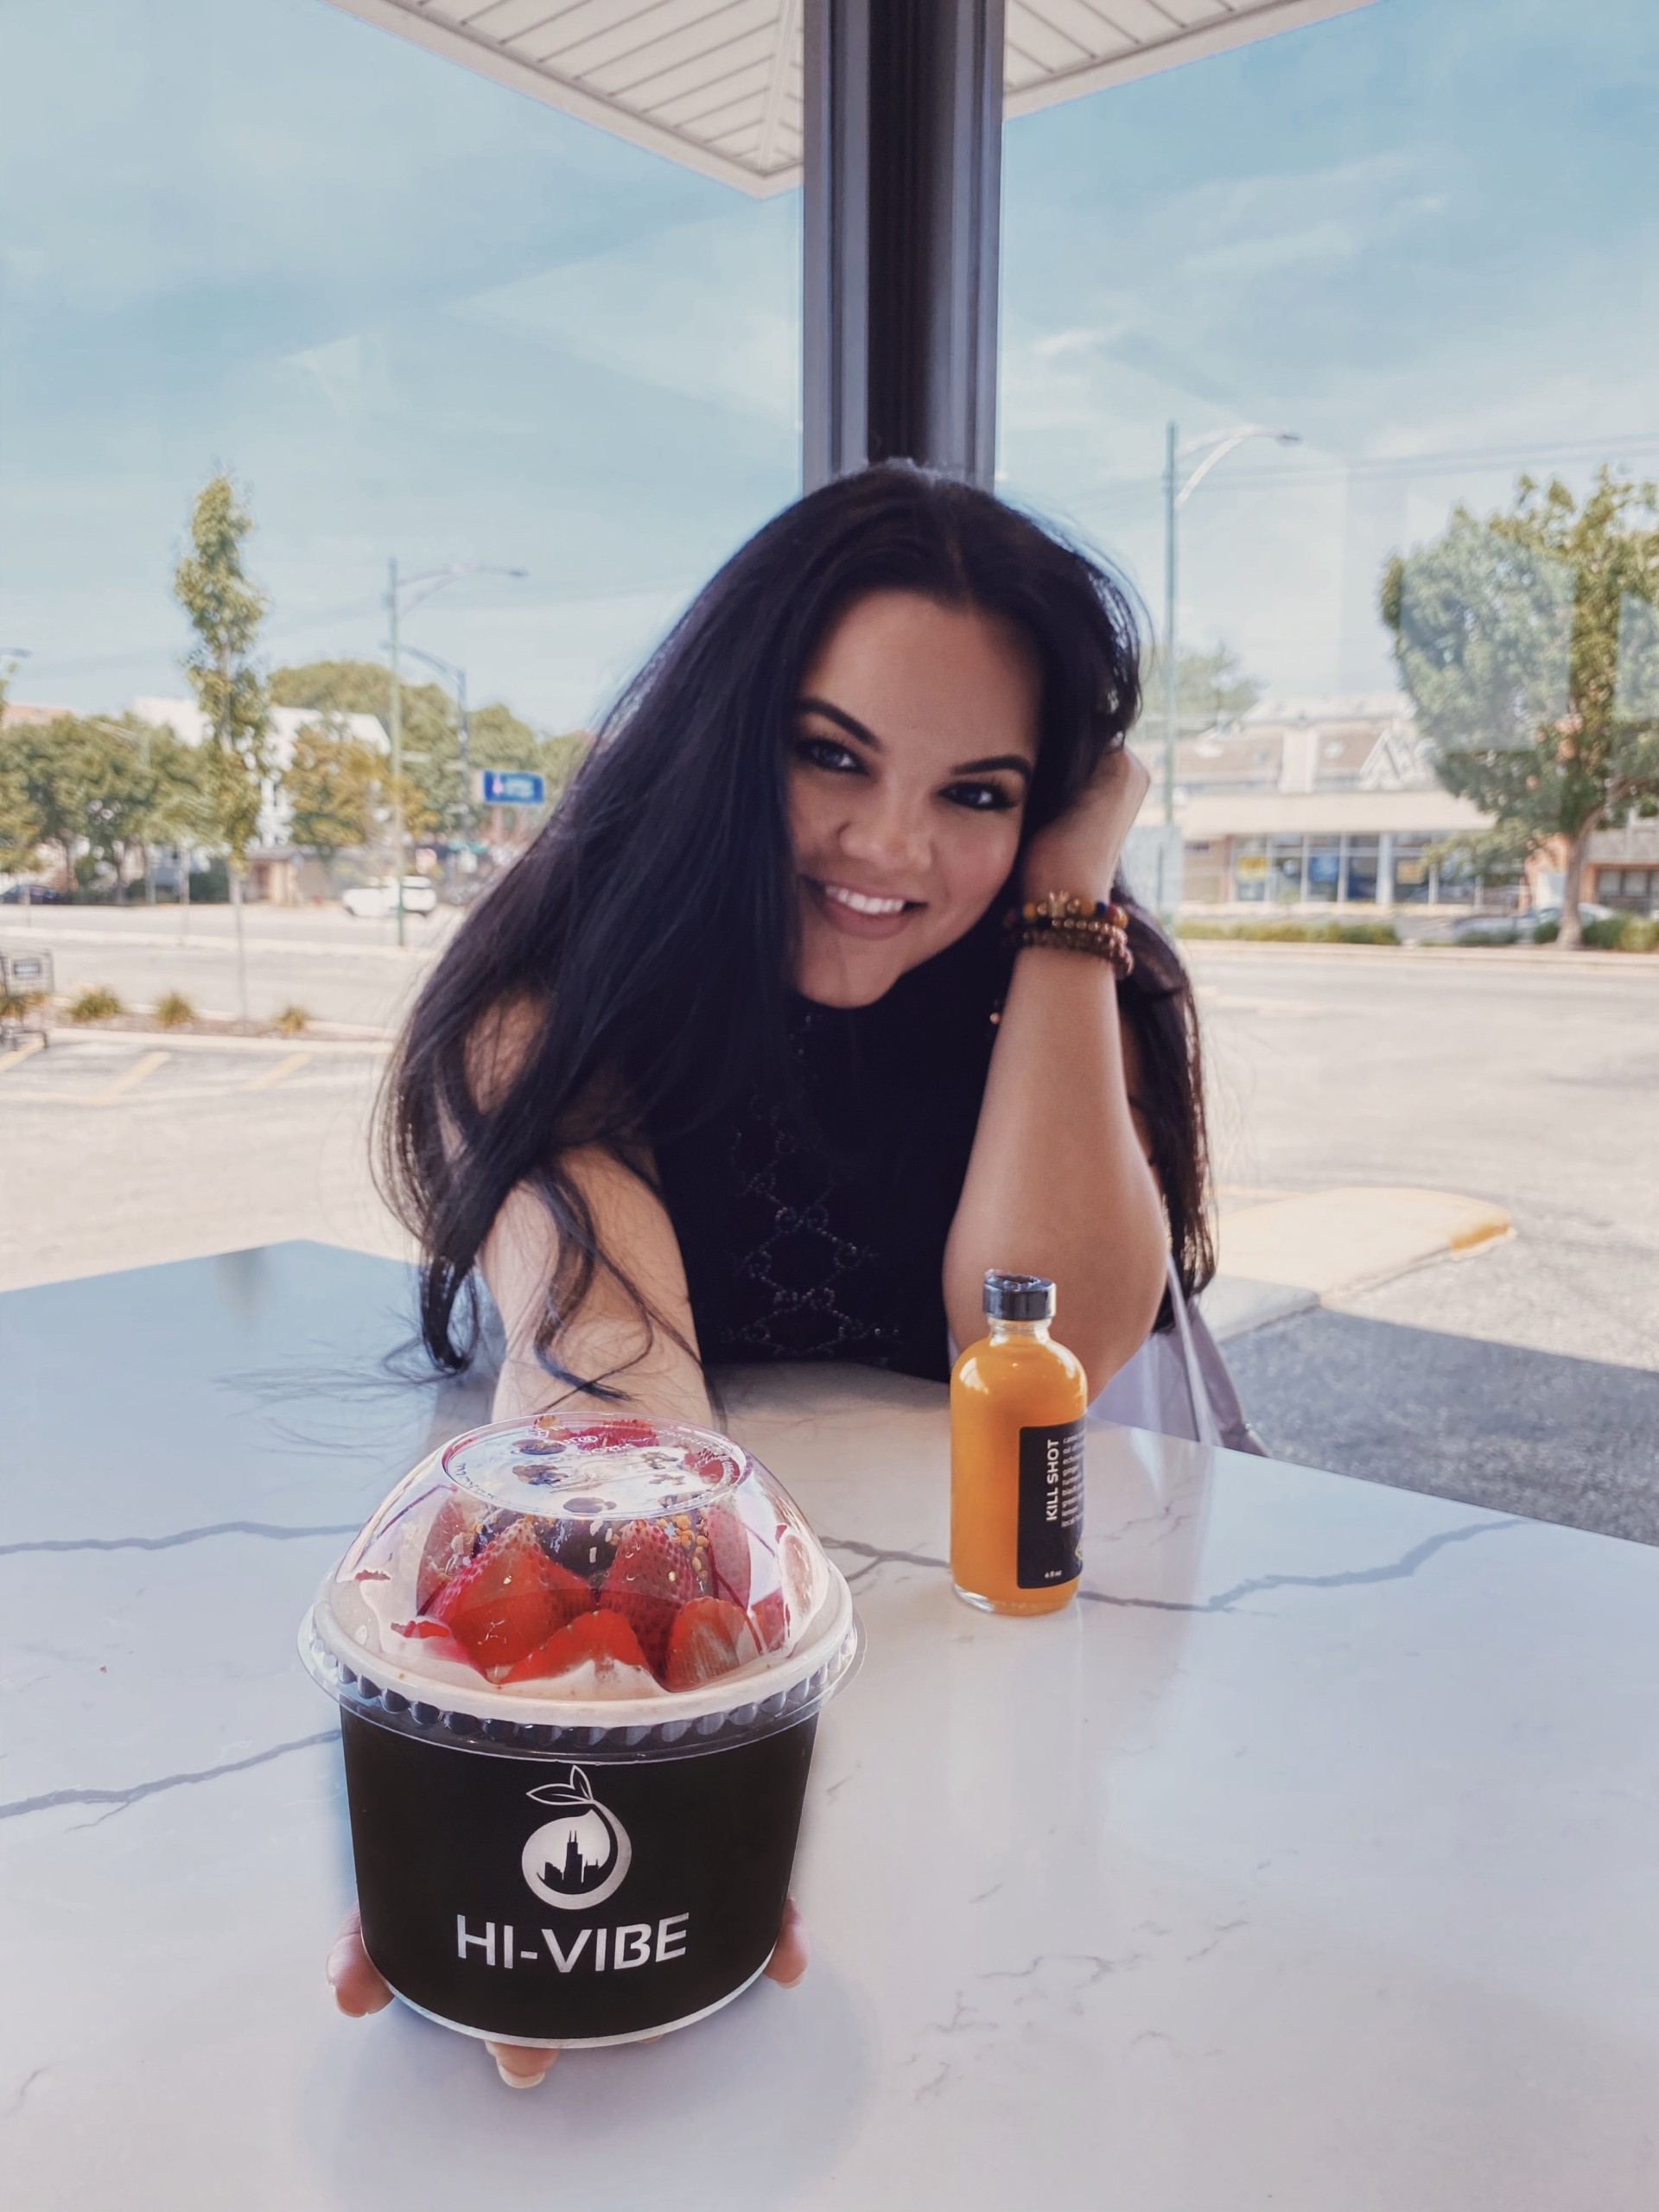 yessi bause posing with acai bowls